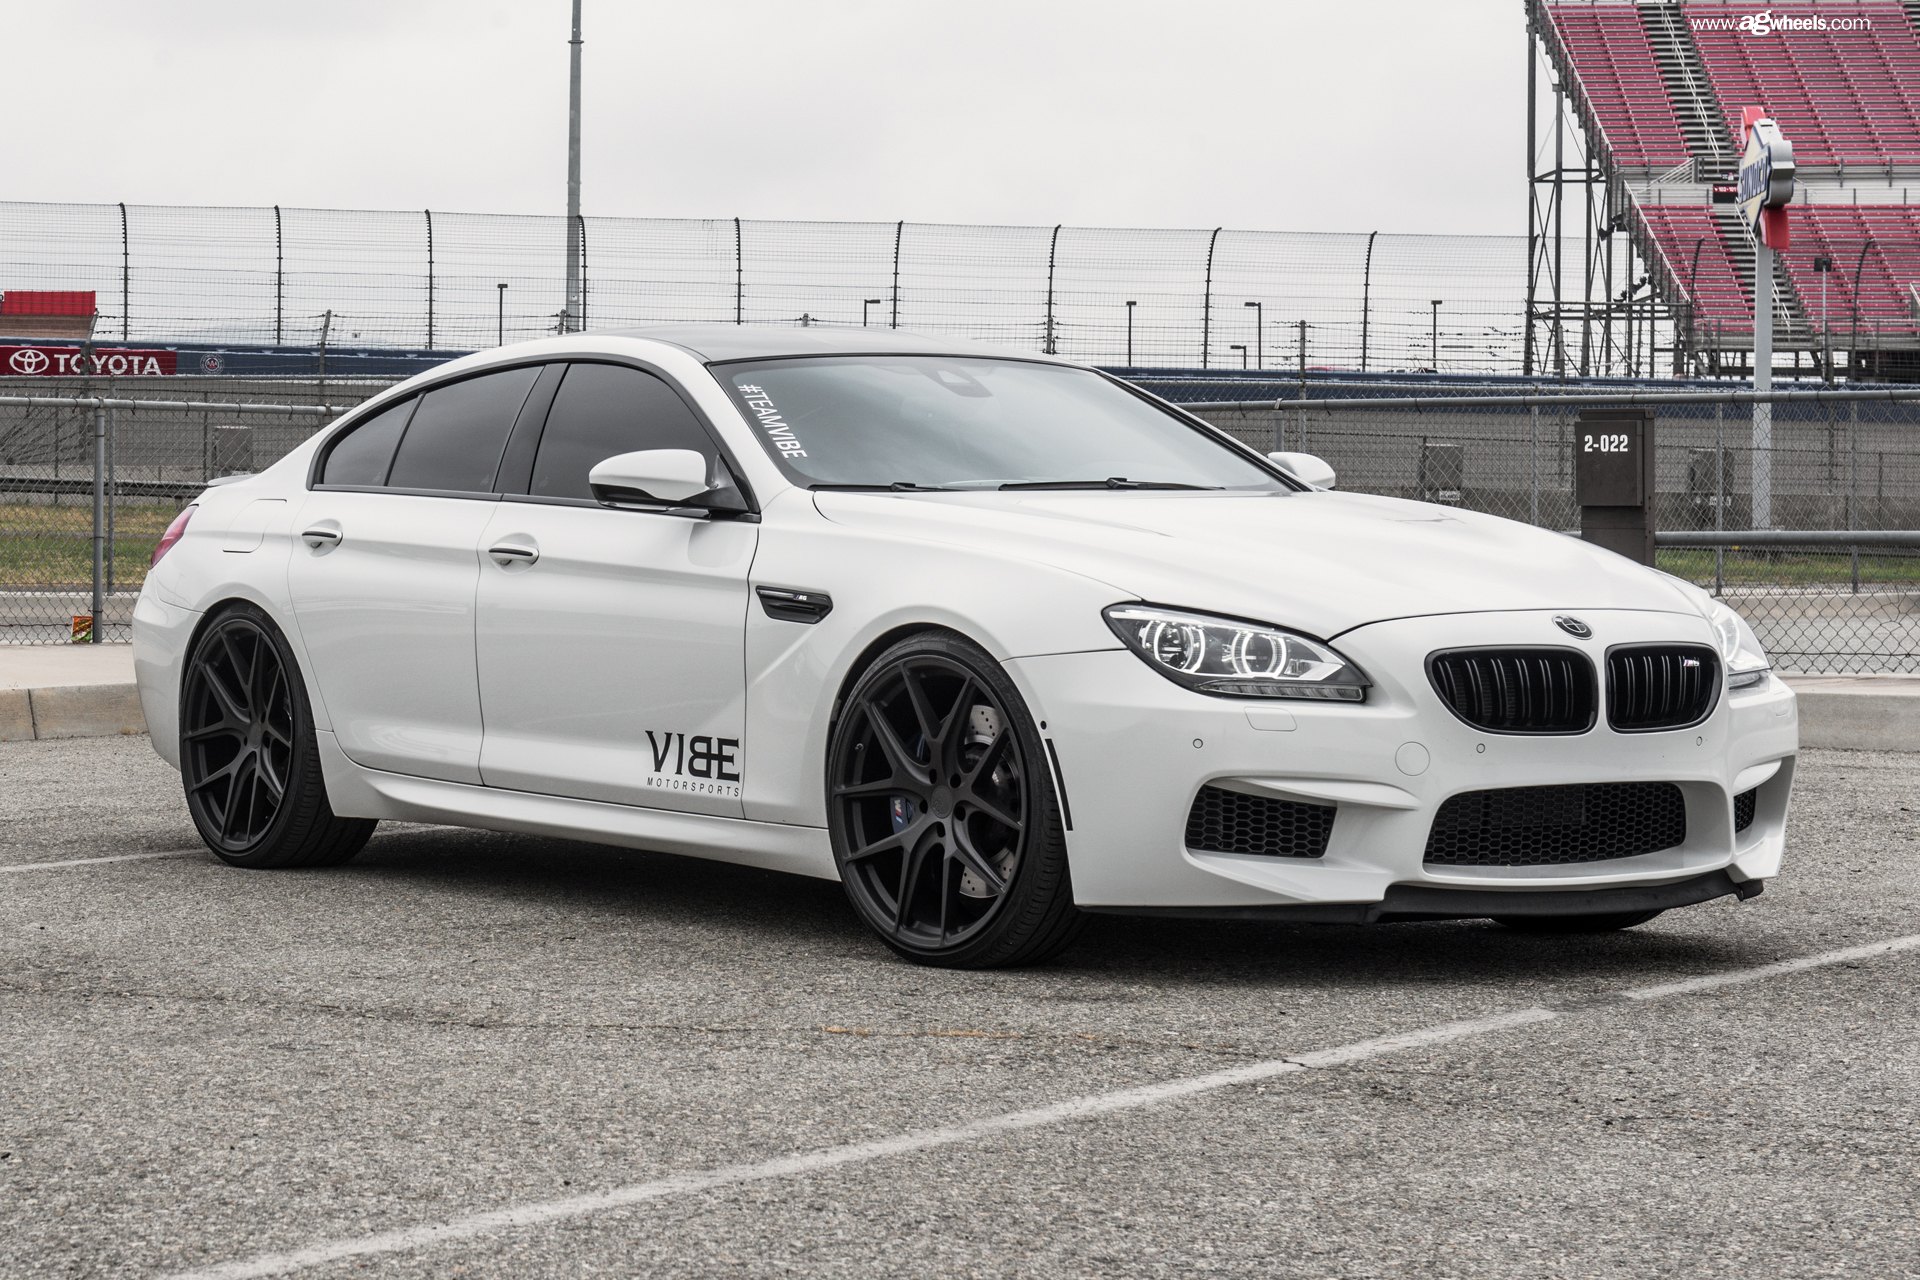 Aftermarket Halo Headlights on White BMW 6-Series - Photo by Avant Garde Wheels